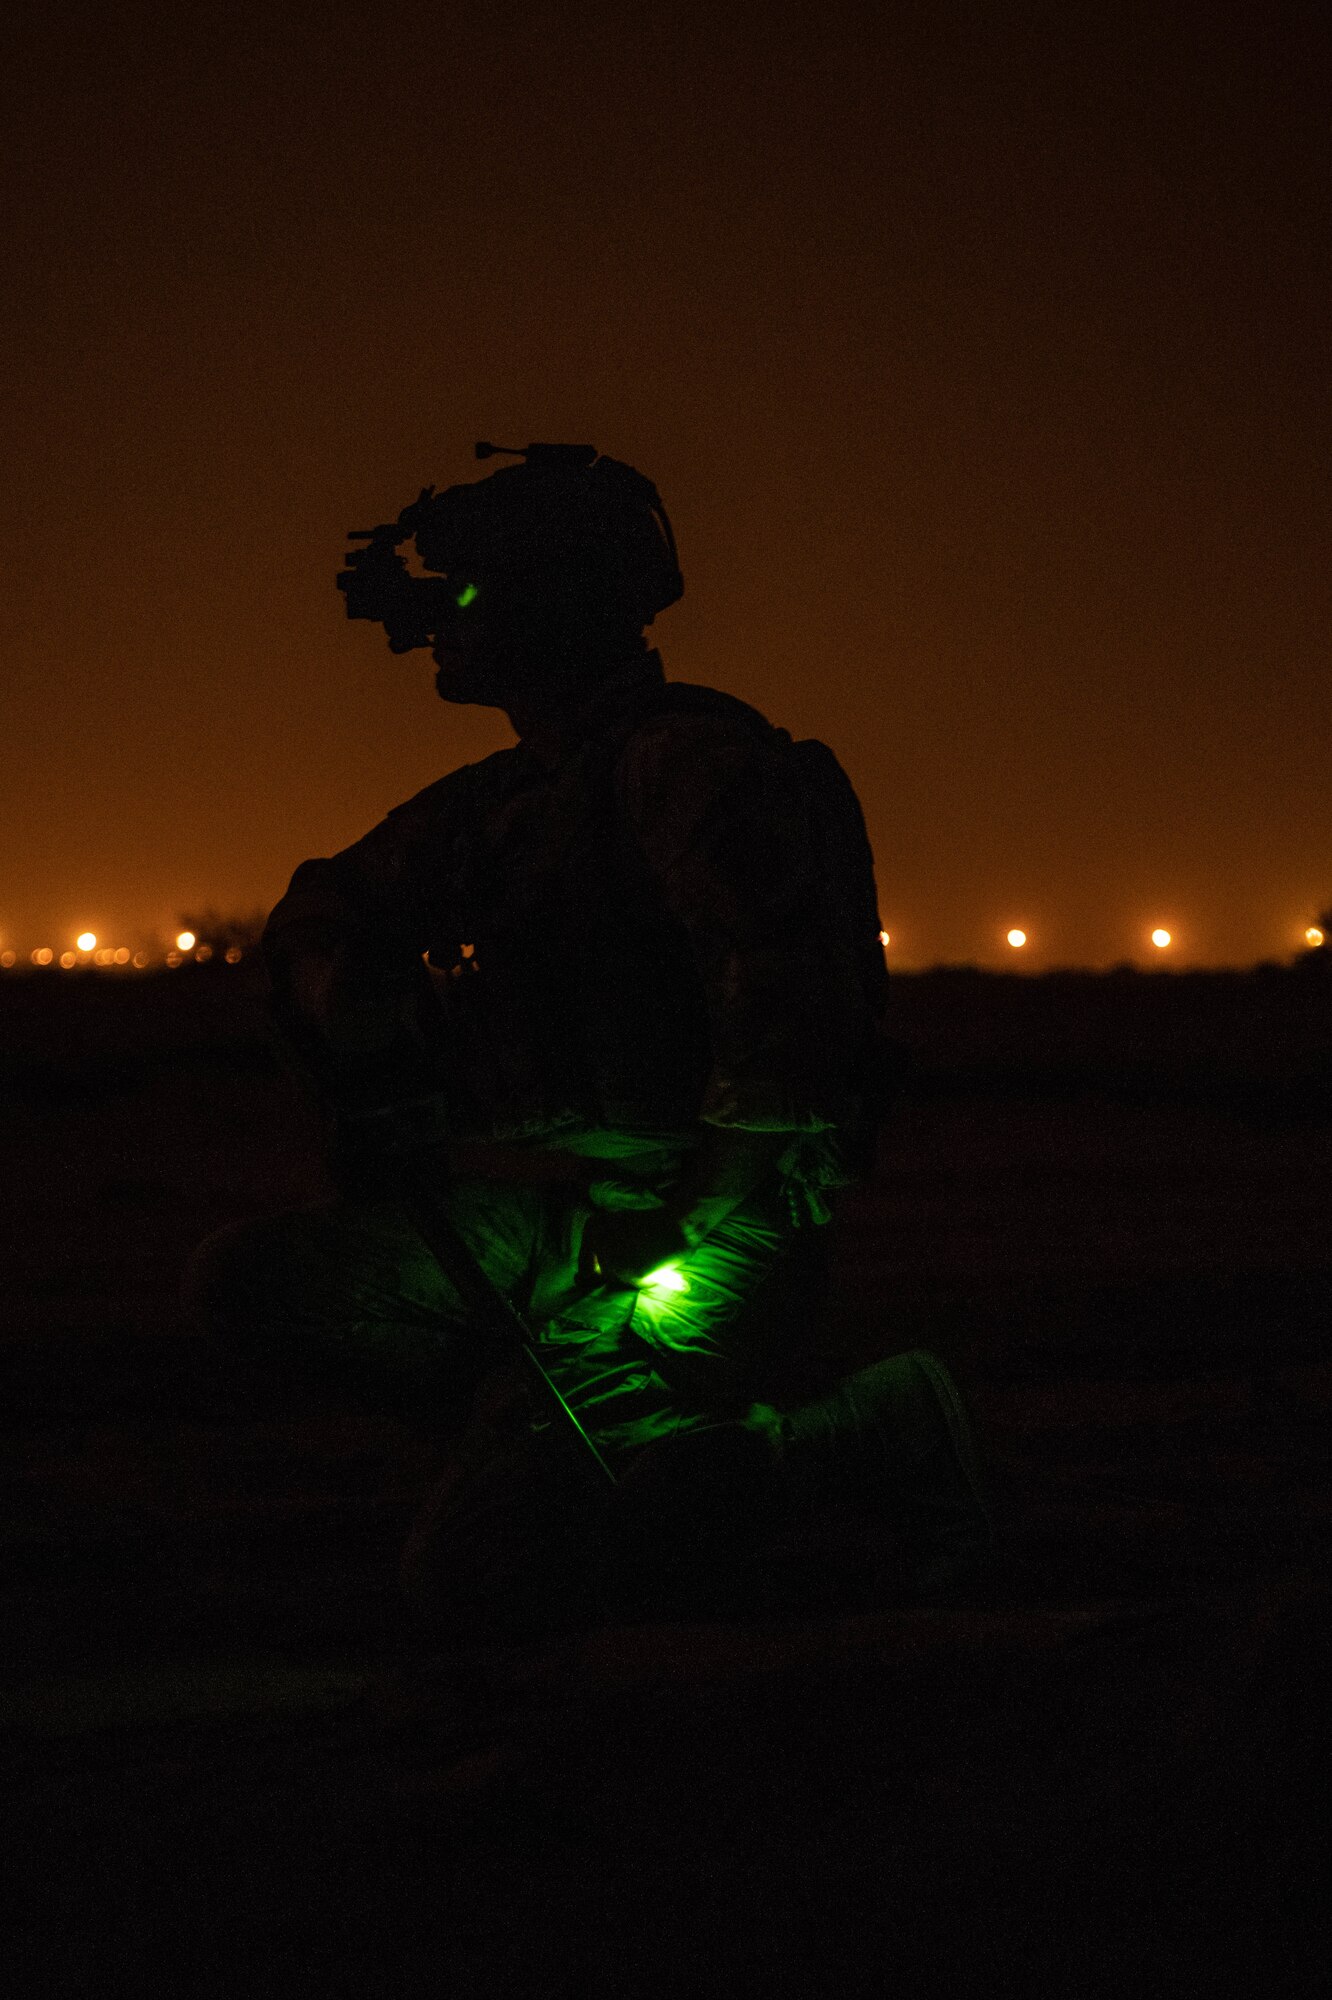 U.S. Air Force Staff Sgt. Gideon Hanes, 378th Expeditionary Civil Engineer Squadron Explosive Ordnance Disposal team lead, pauses to survey the road ahead while searching for simulated improvised explosive devices during a quick response training event in blackout conditions at Prince Sultan Air Base, Kingdom of Saudi Arabia, June 12, 2021. PSAB EOD, Security Forces and Medical personnel participated in integrated training to bolster defensive capabilities and maintain readiness at all times. (U.S. Air Force photo by Capt. Rachel Buitrago)